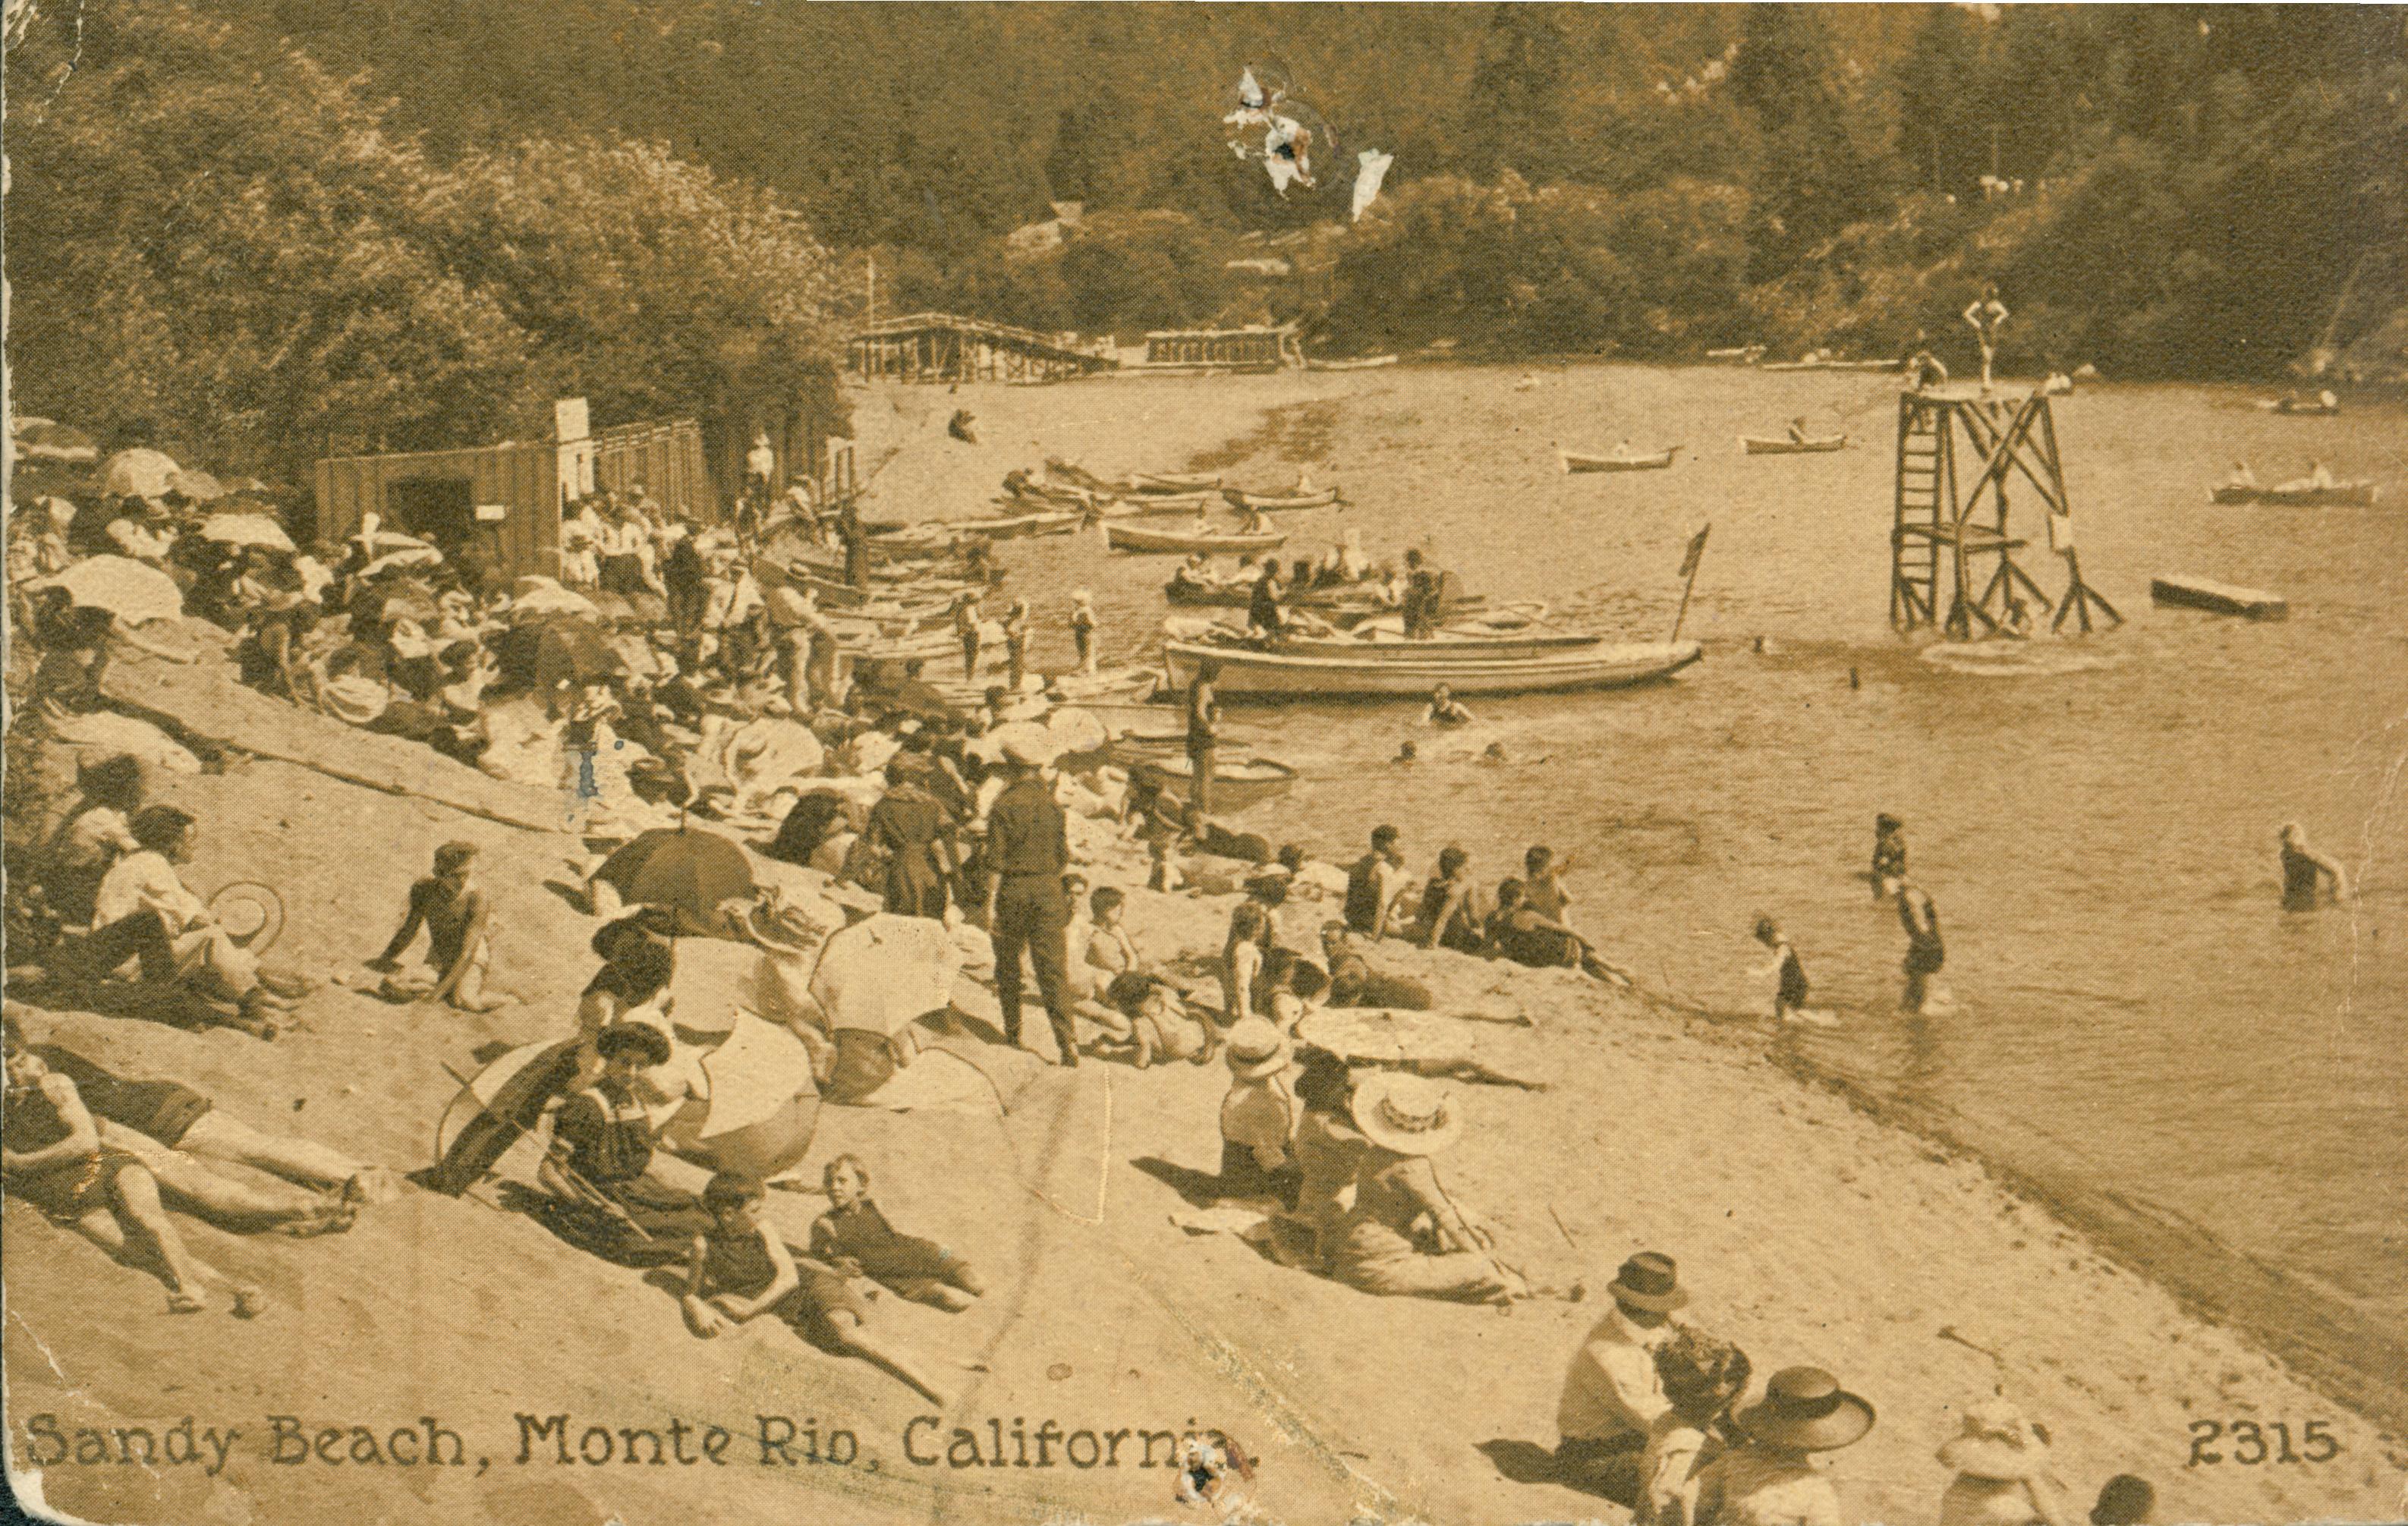 Shows a crowded beach filled with sunbathers, swimmers and boaters